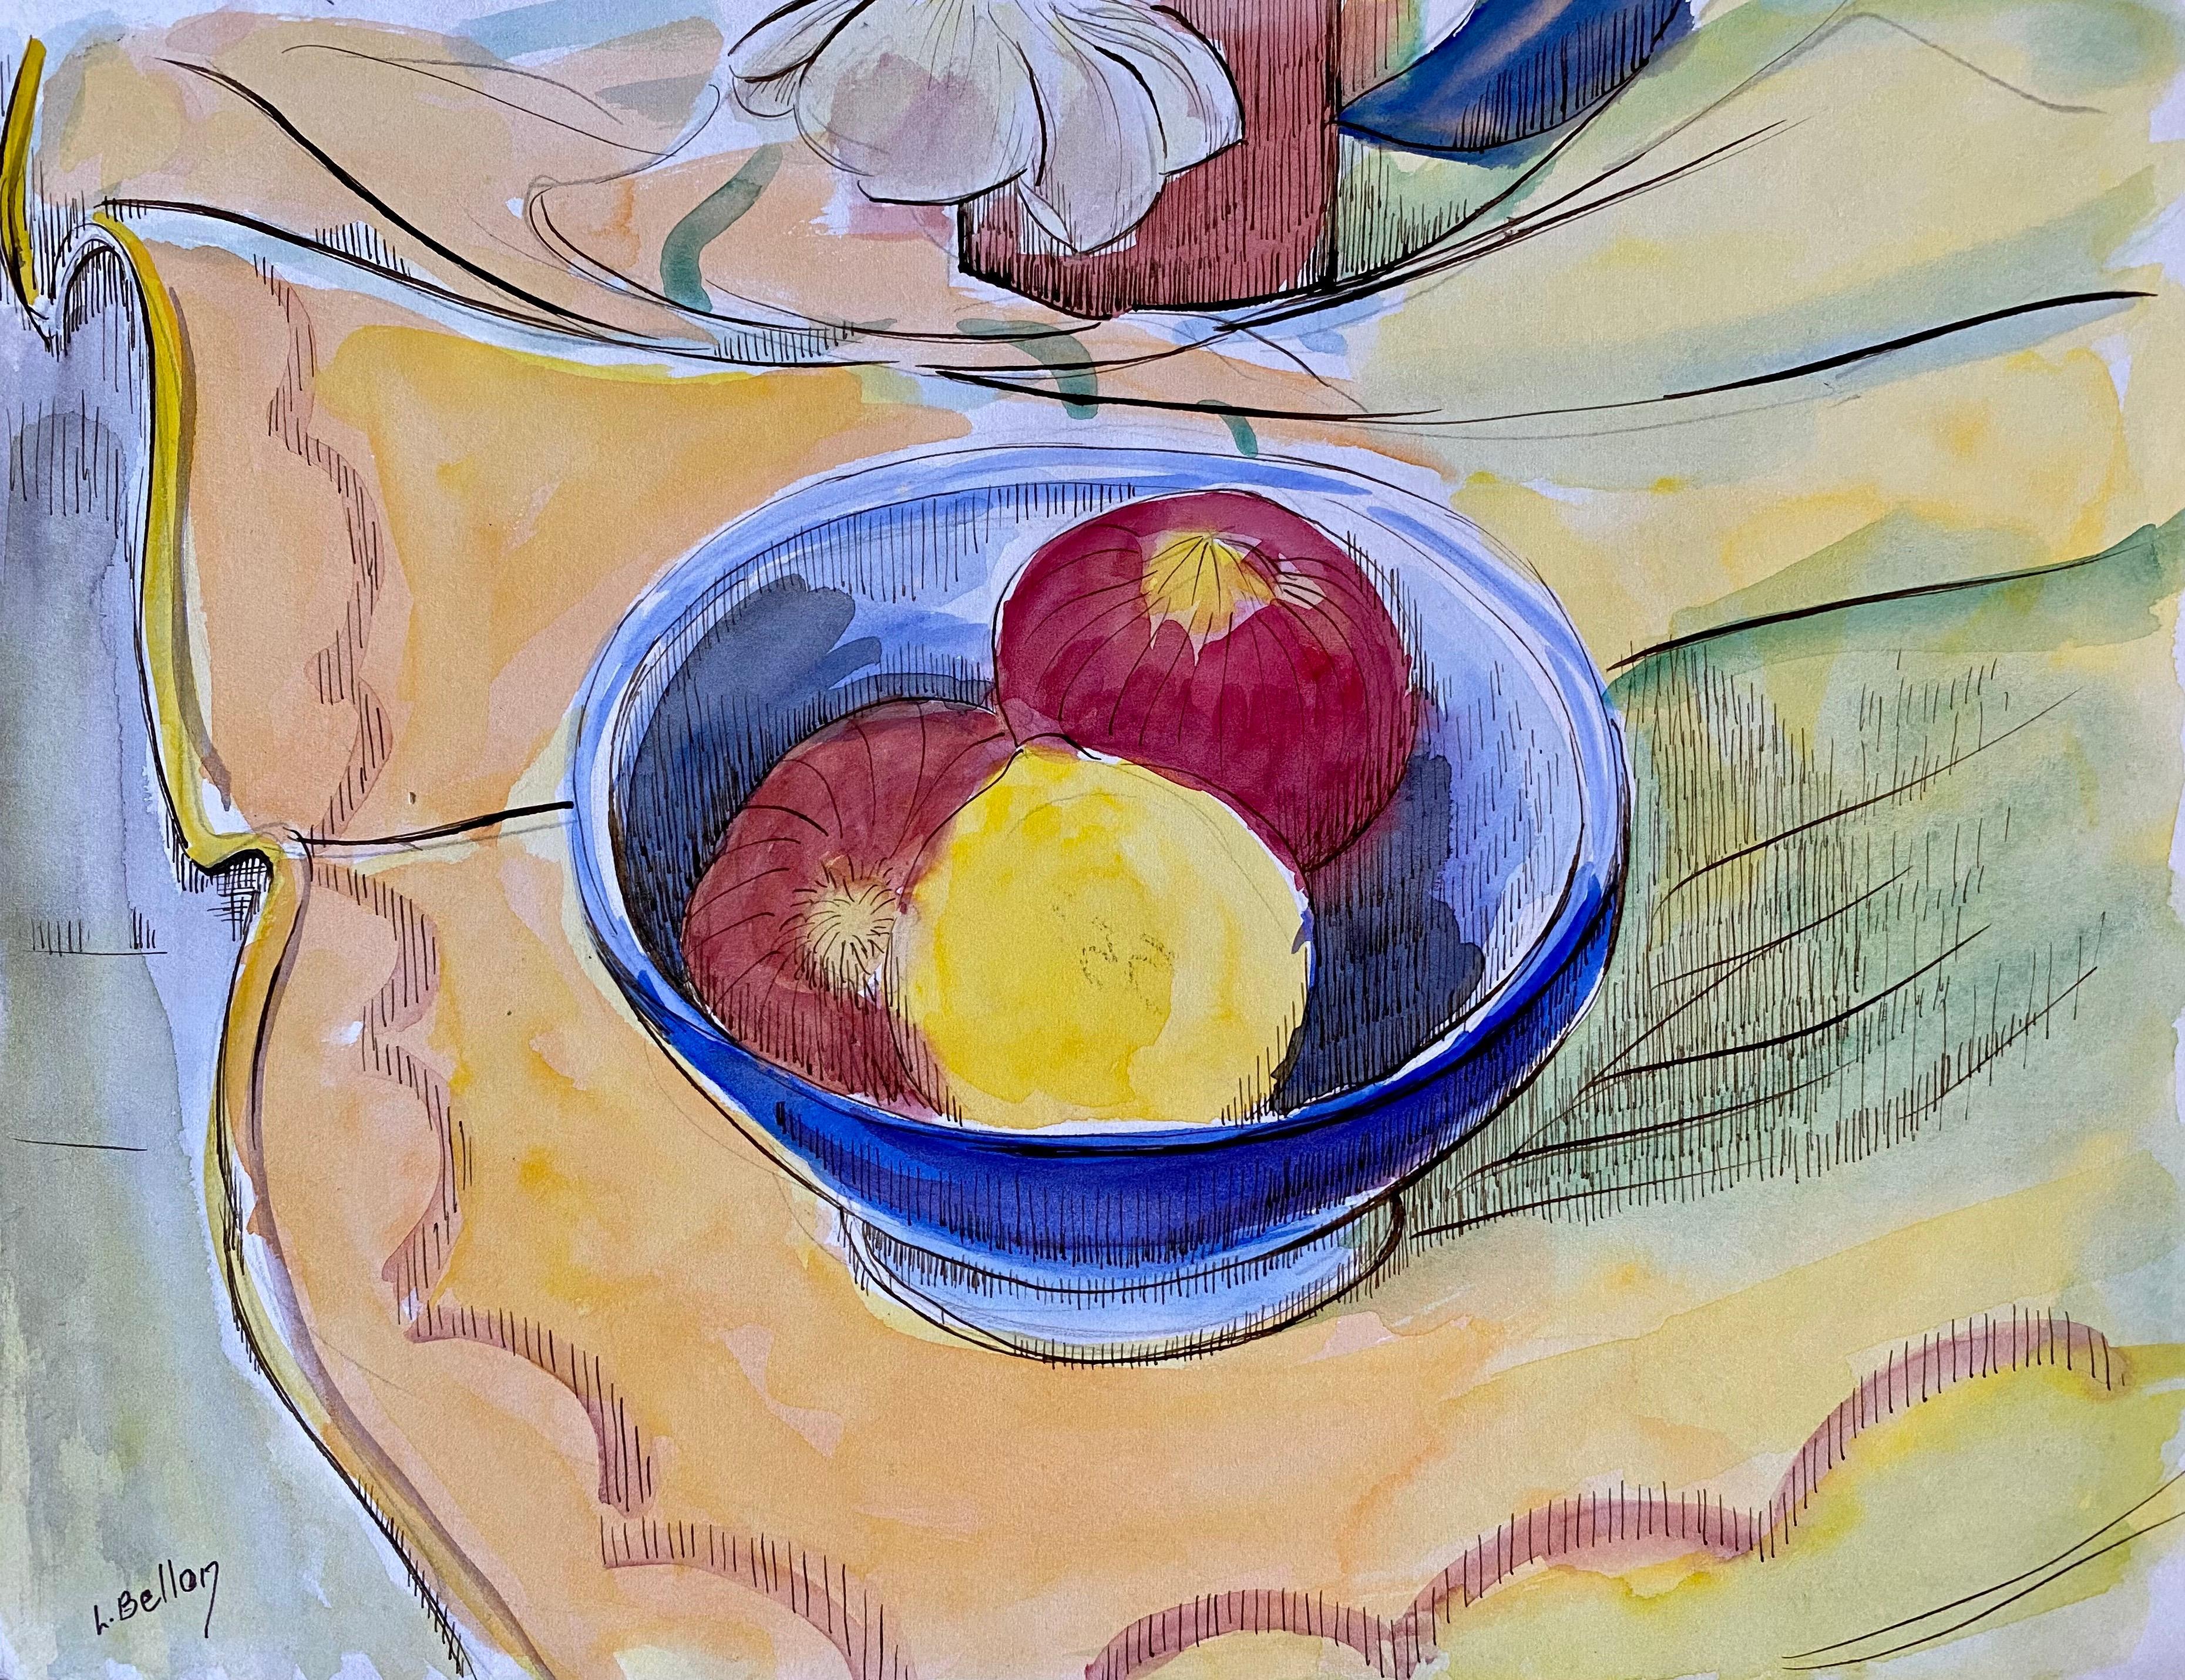 Still Life
Signed by Louis Bellon (French 1908-1998)
From a batch of similar work where most were dated 1942-1947
watercolour painting on paper, unframed

measurements: 10 x 12.75 inches

provenance: private collection of the artists work,